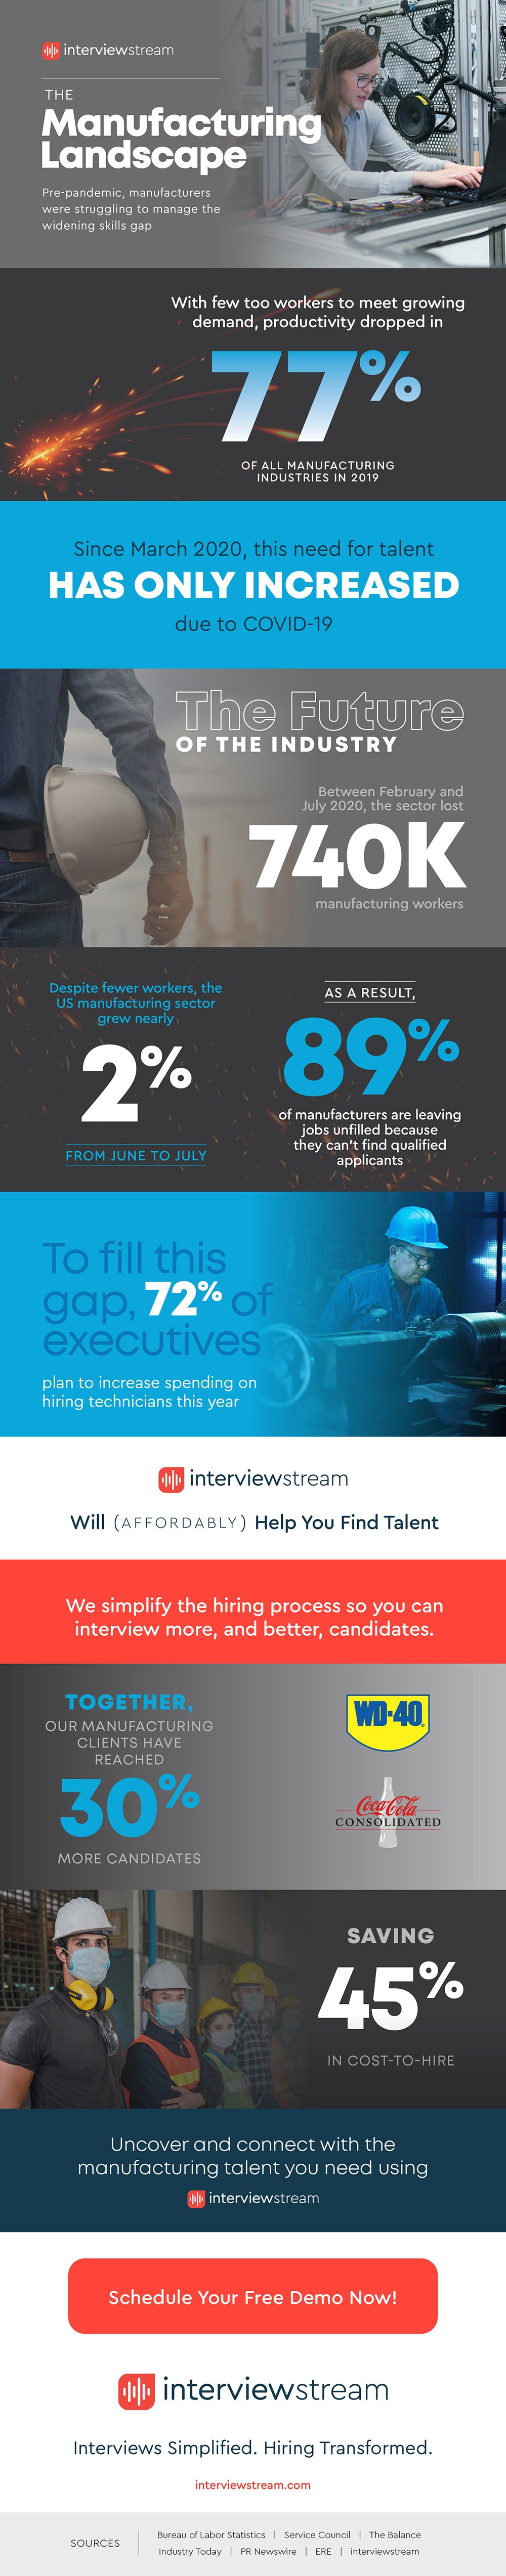 Infographic showing the pandemic impact on manufacturing companies' search for talent